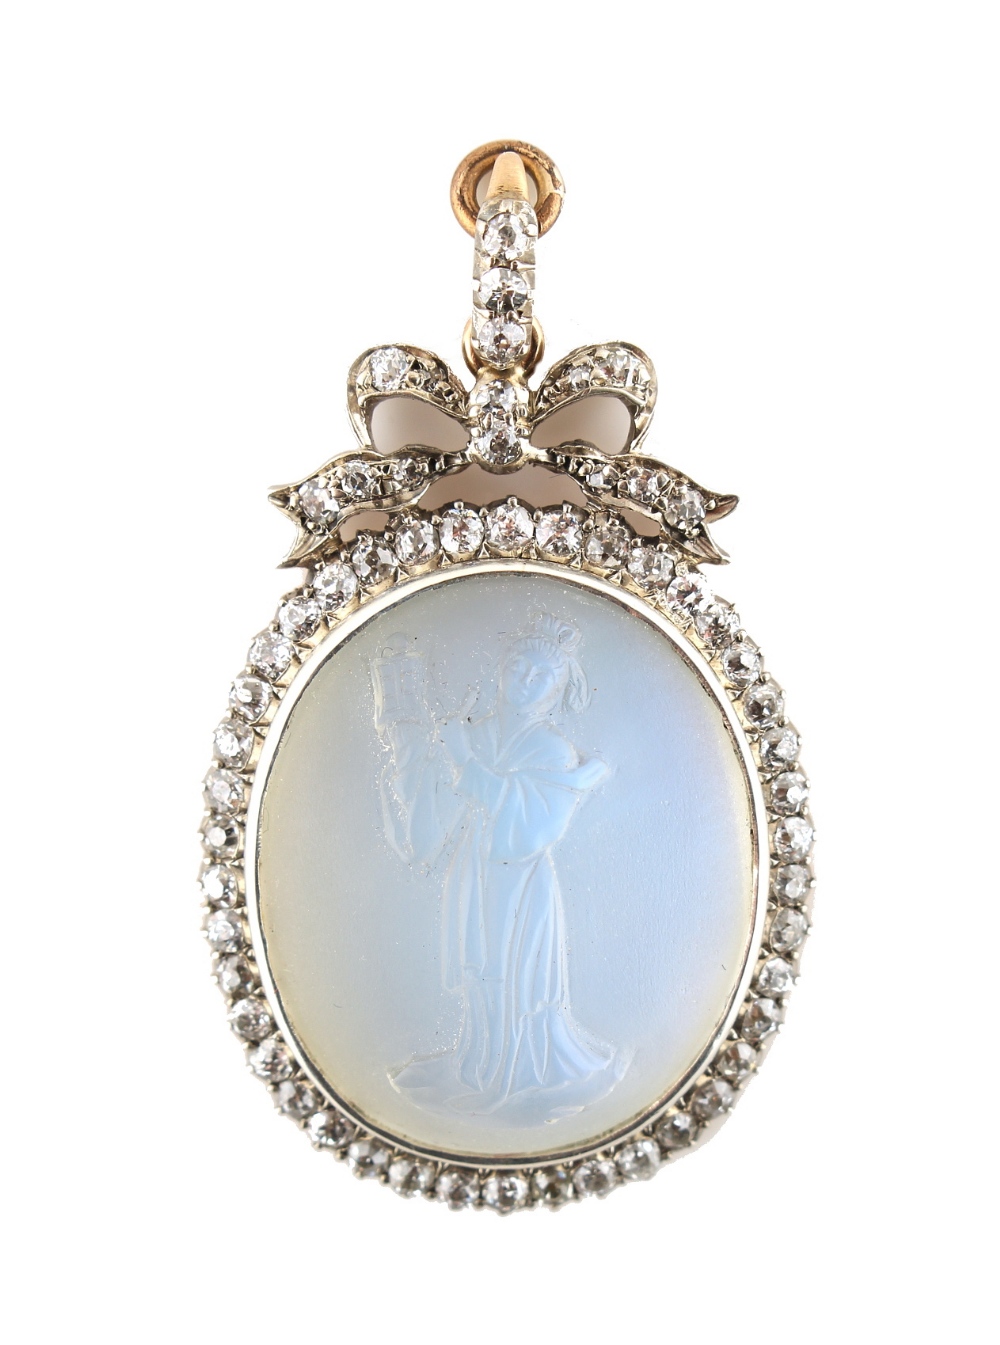 A good 19th century Italian diamond & carved rock crystal oval cameo pendant depicting a standing